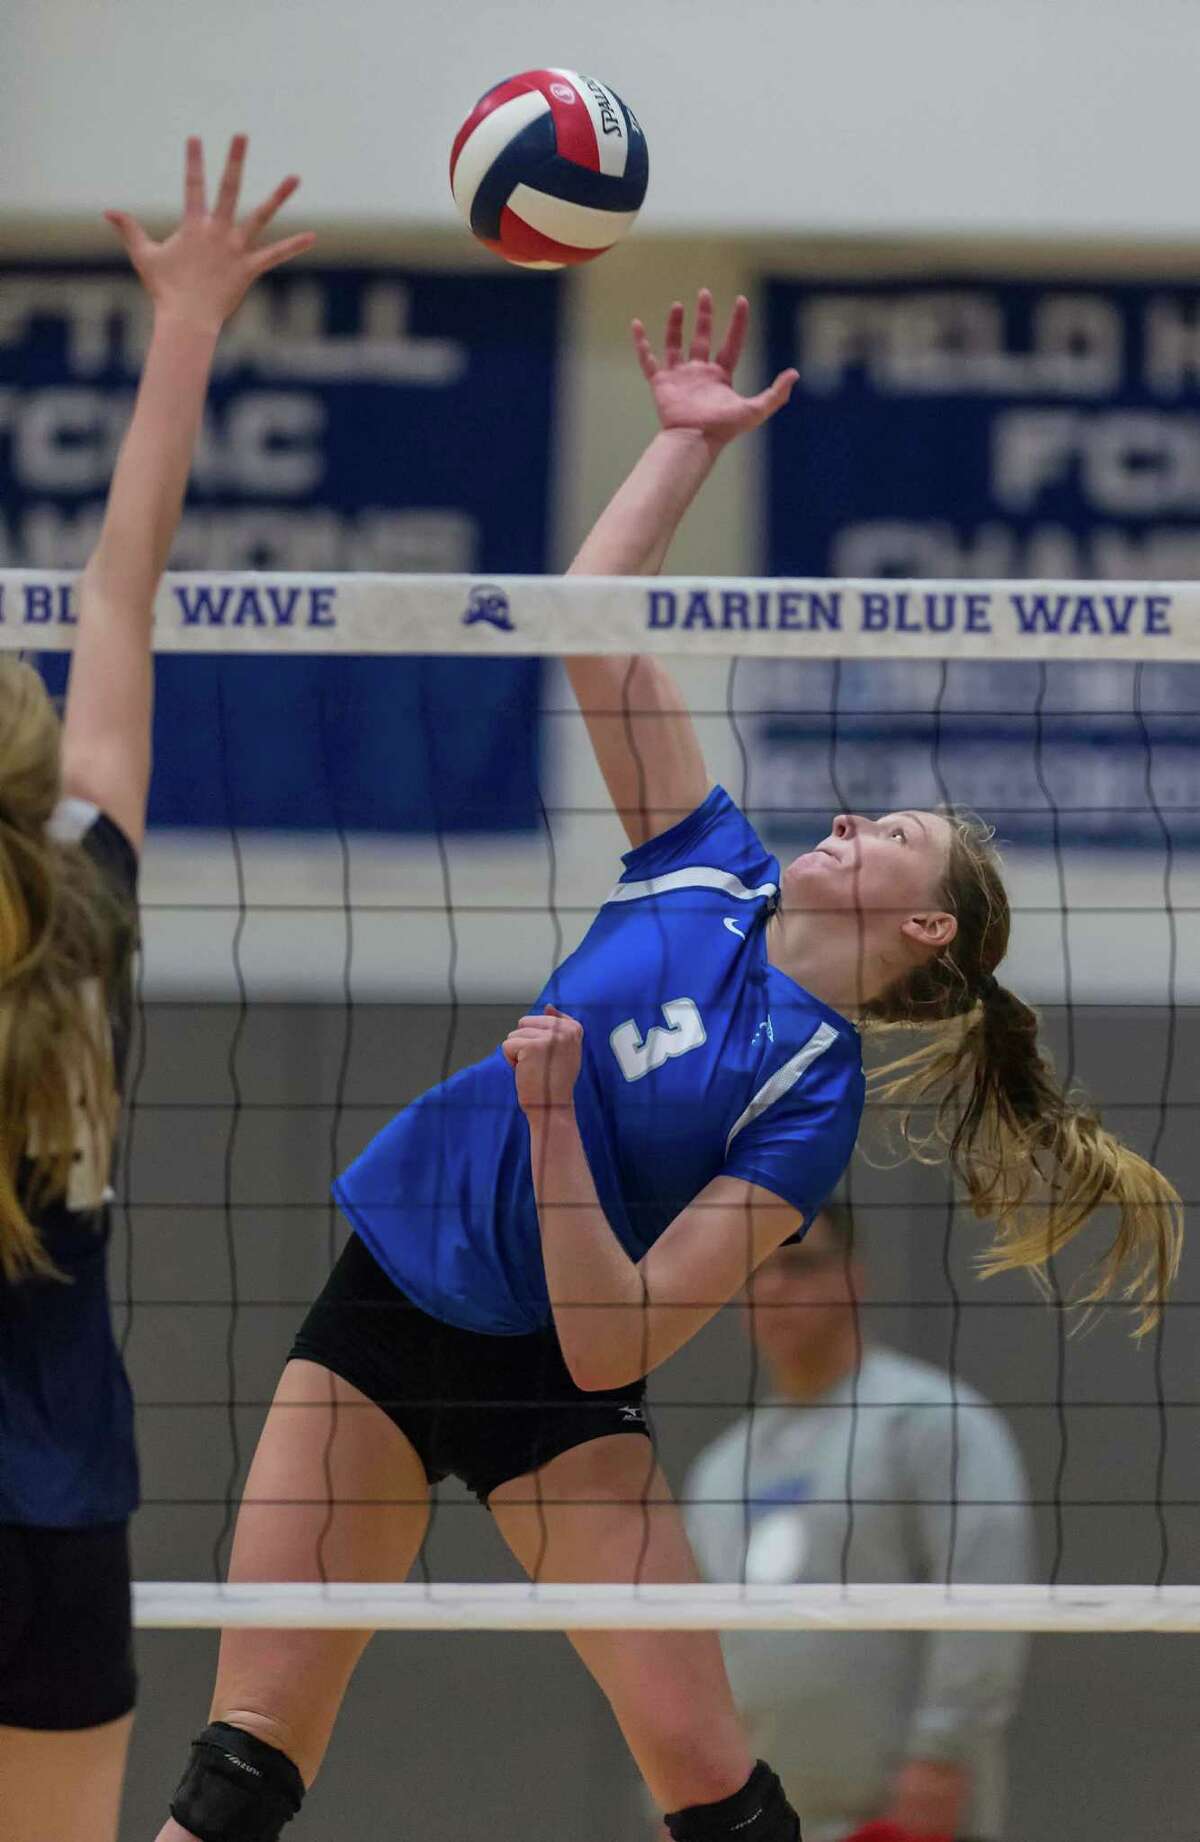 Darien High Schools Isabelle Taylor goes up to spike the ball during an FCIAC girls volleyball tournament match against Staples High School played at Darien High School, Darien, CT Tuesday, November 3, 2015.